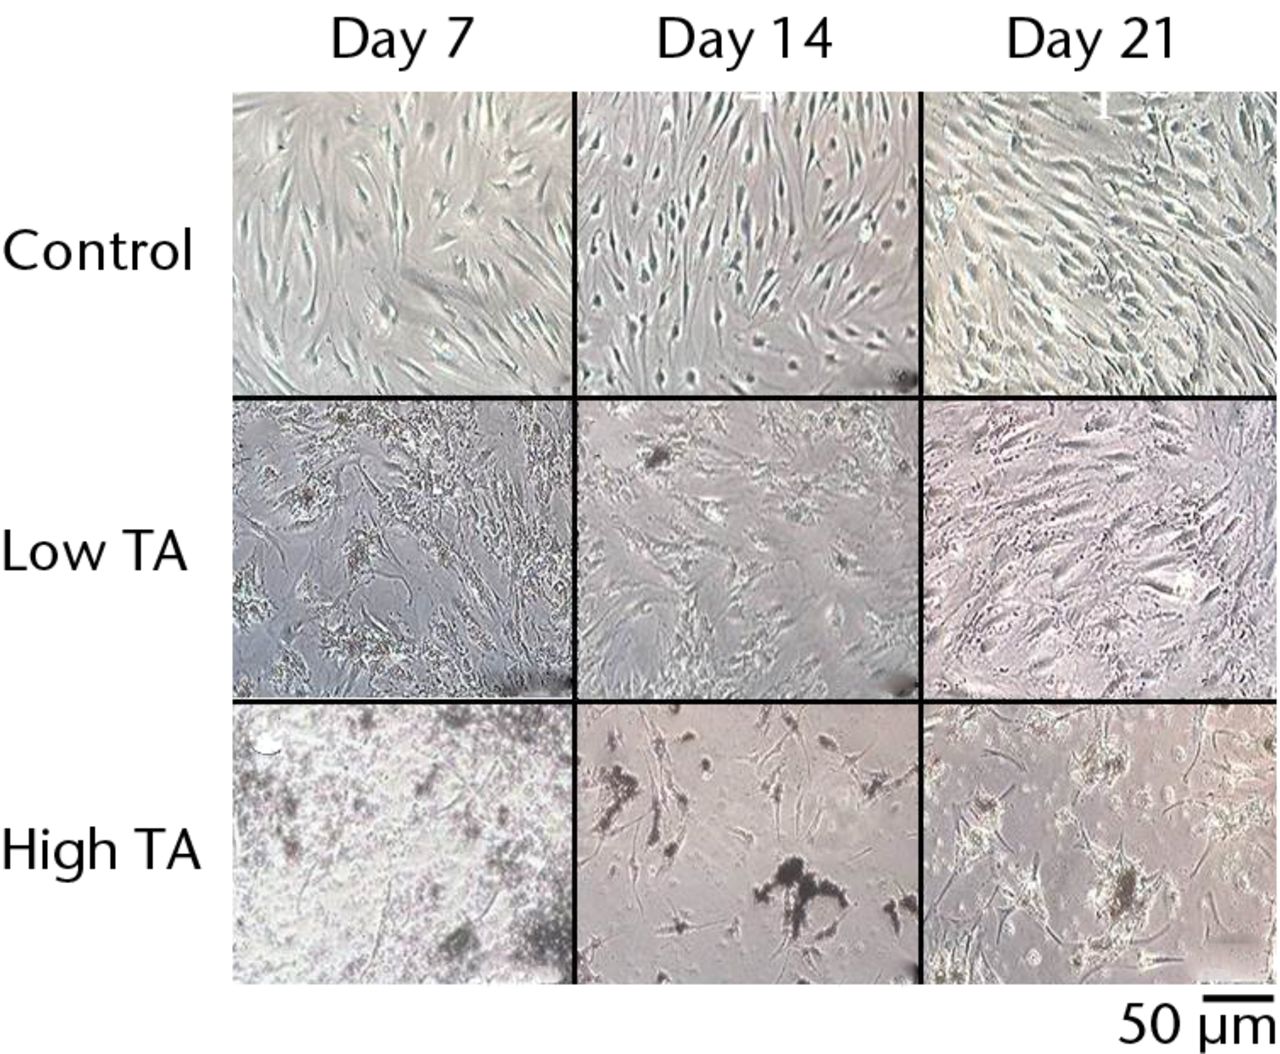 Fig. 2 
            Cell morphology showing that exposure
to triamcinolone acetonide (TA) for seven days yielded flattened
and polygonal cells. However, cells in the low TA group had a similar
appearance to the control cells at day 21. In the high TA group,
there was no recovery of appearance after 21 days.
          